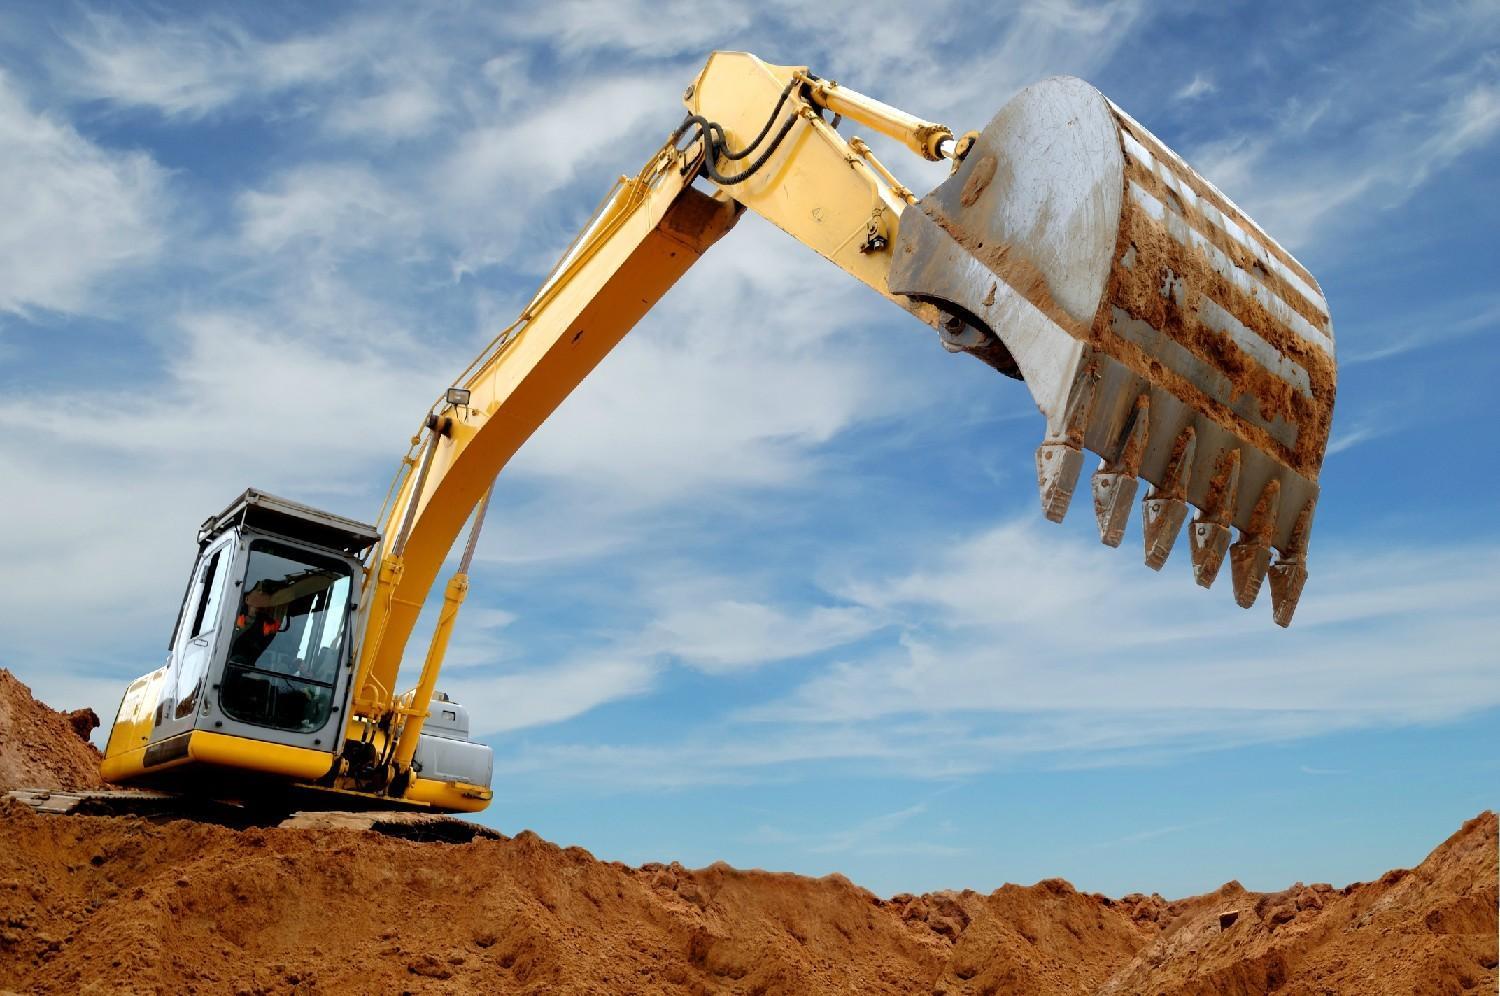 6 Tips on Buying Used Construction Equipment